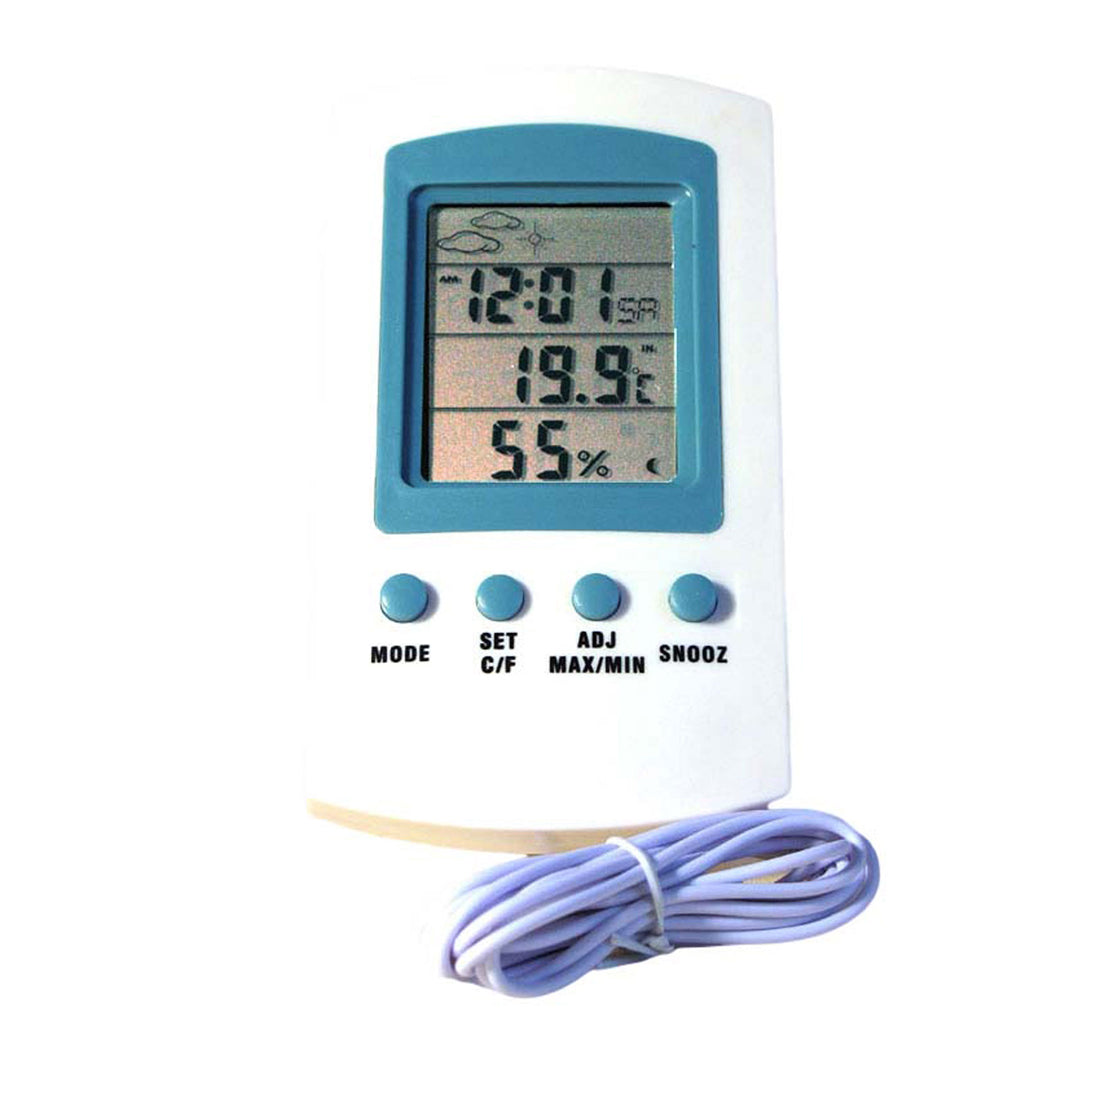 LCD Digital Thermometer + Humidity with 3 remote probes Bulk Buy x12